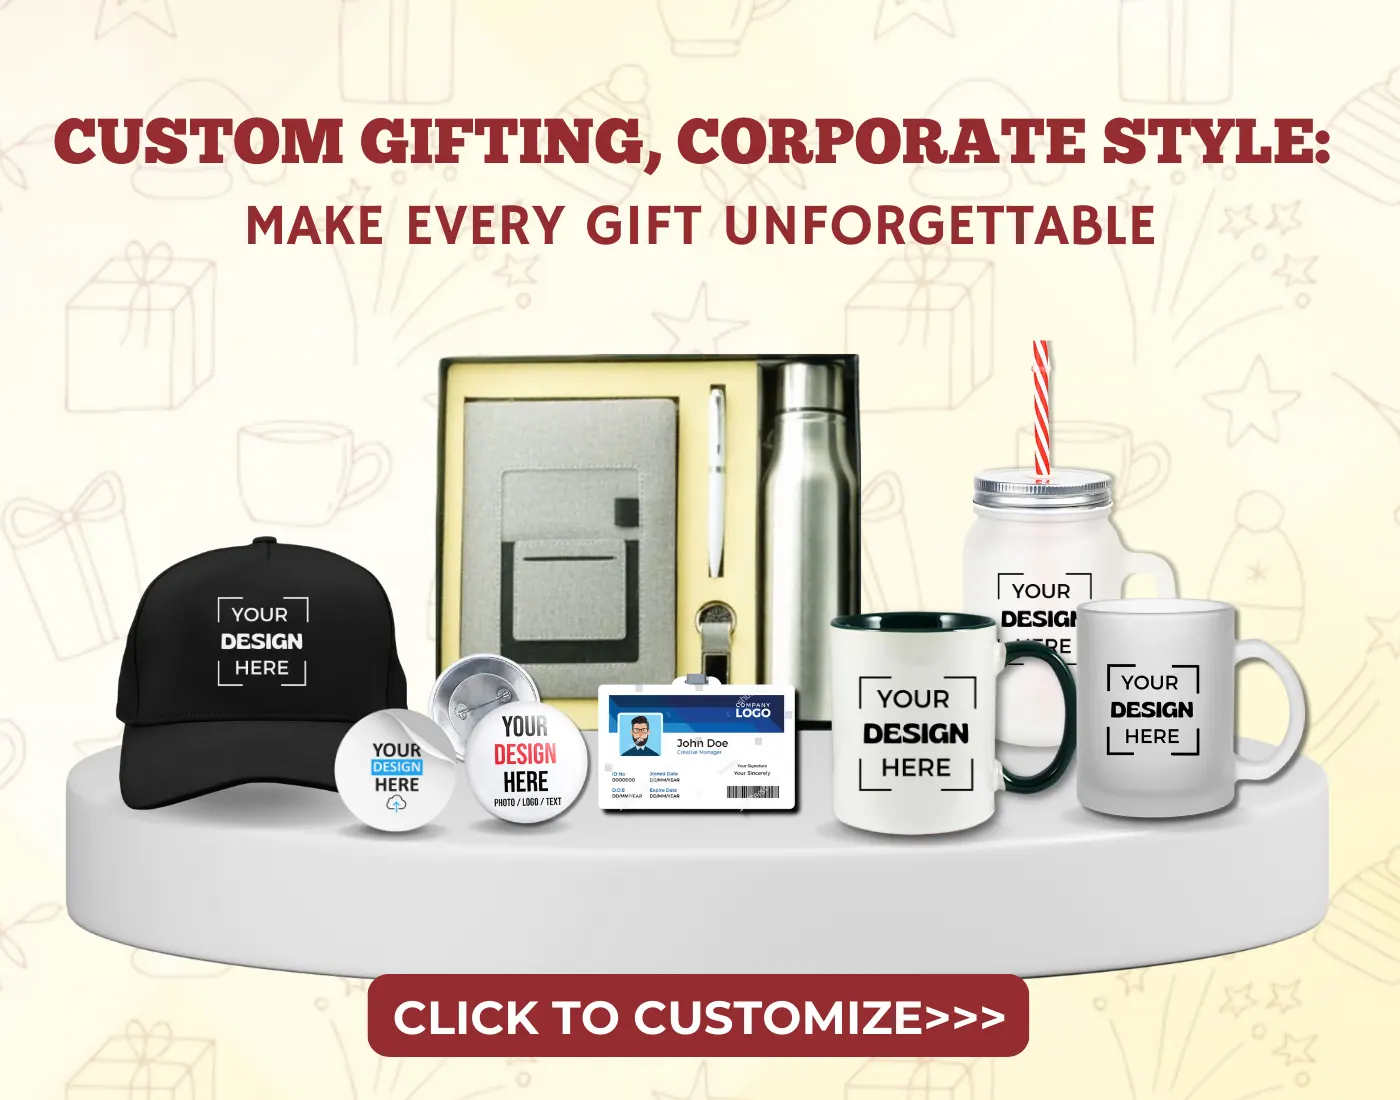 Employee Appreciation Kit 1 - Customized Gift Set for Valued Employees